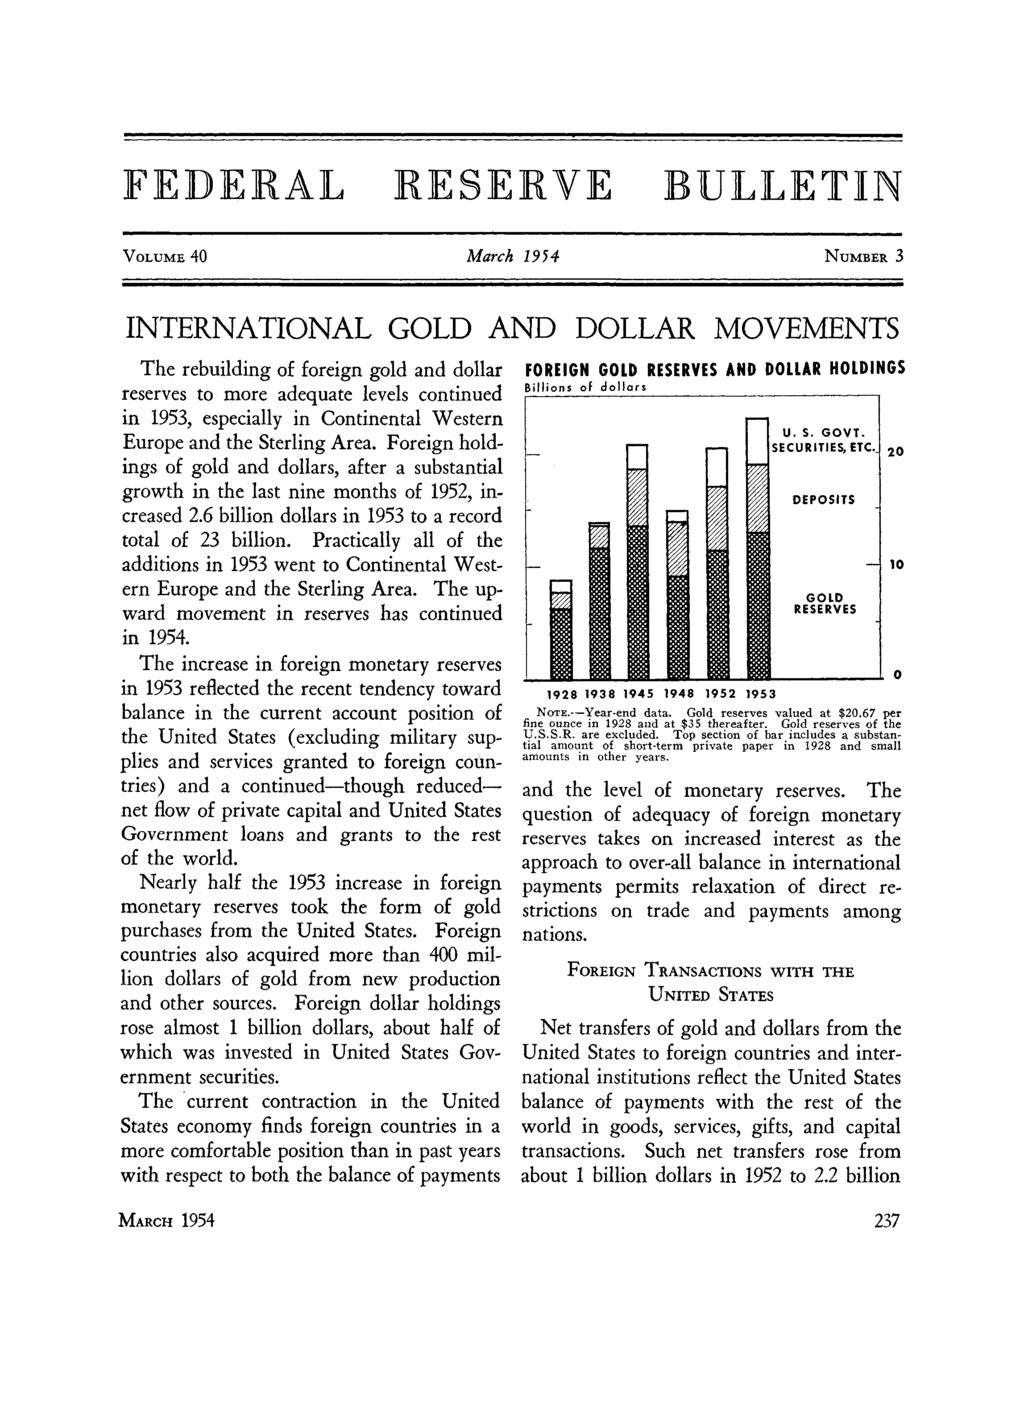 March 9 FEDERAL RESERVE BULLETIN VOLUME 0 March 9 NUMBER The rebuilding of foreign gold and dollar to more adequate levels continued in 9, especially in Continental Western Europe and the Sterling